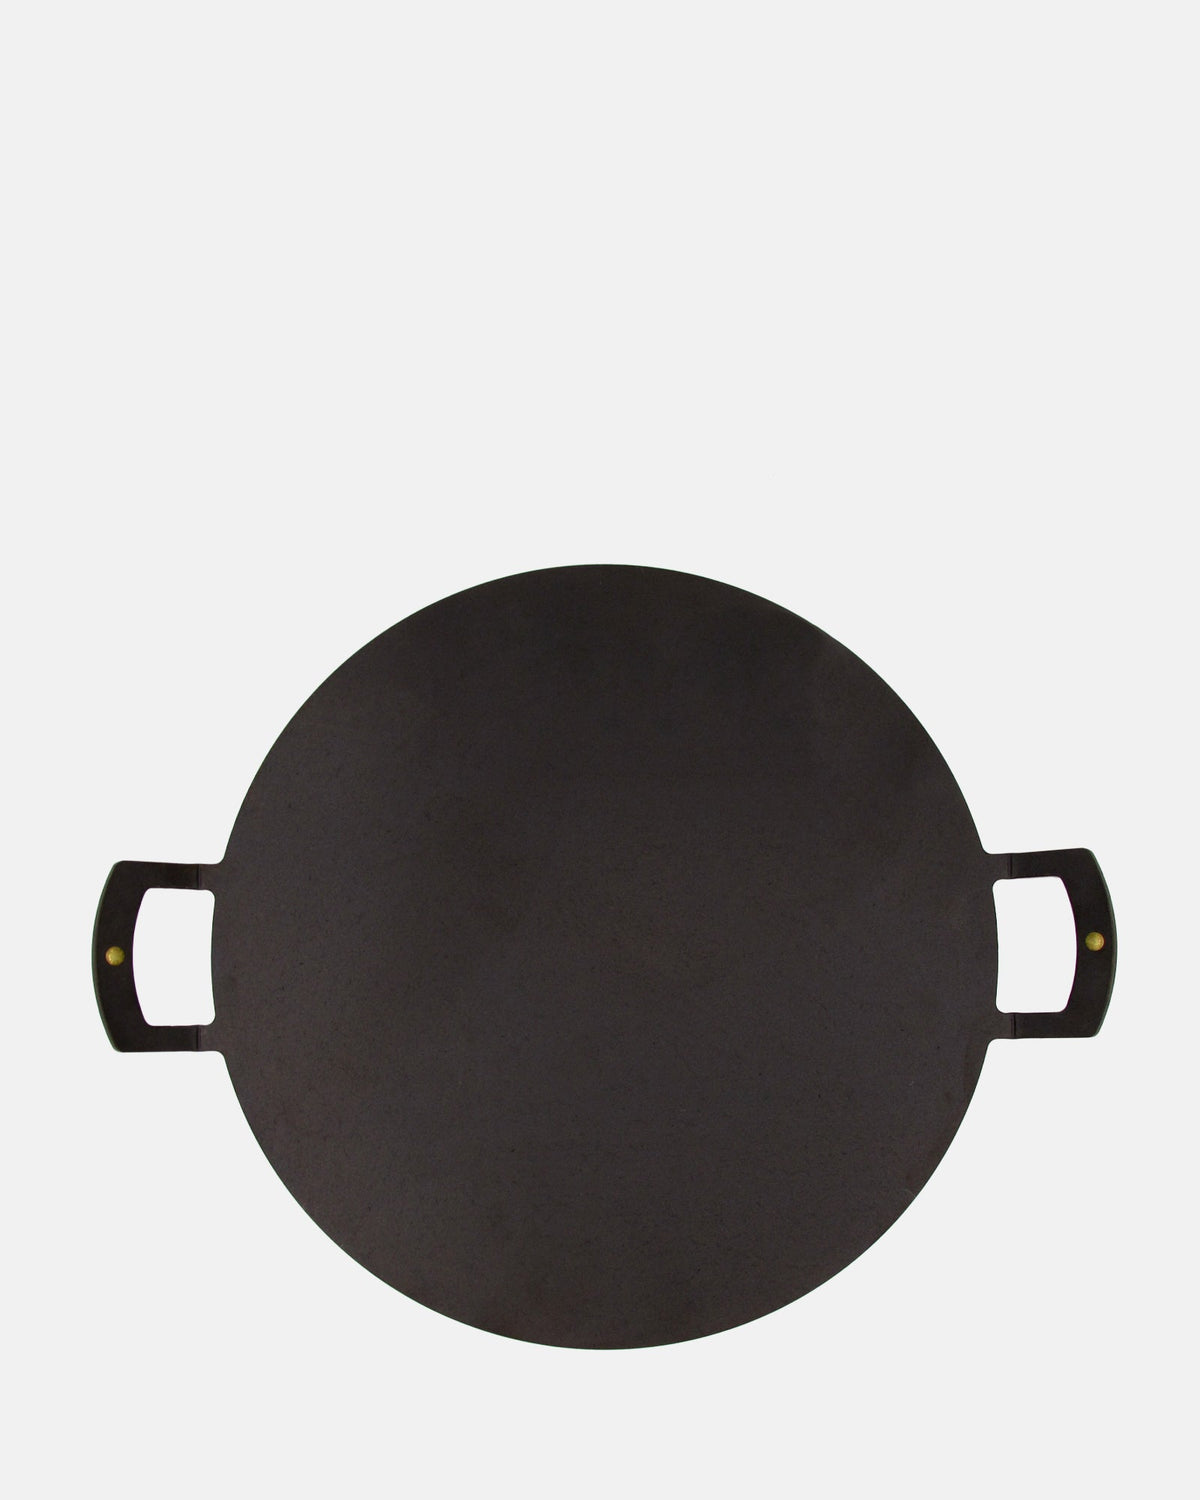 15 inch Black Iron Chapa Griddle Plate with Legs - BRIT LOCKER